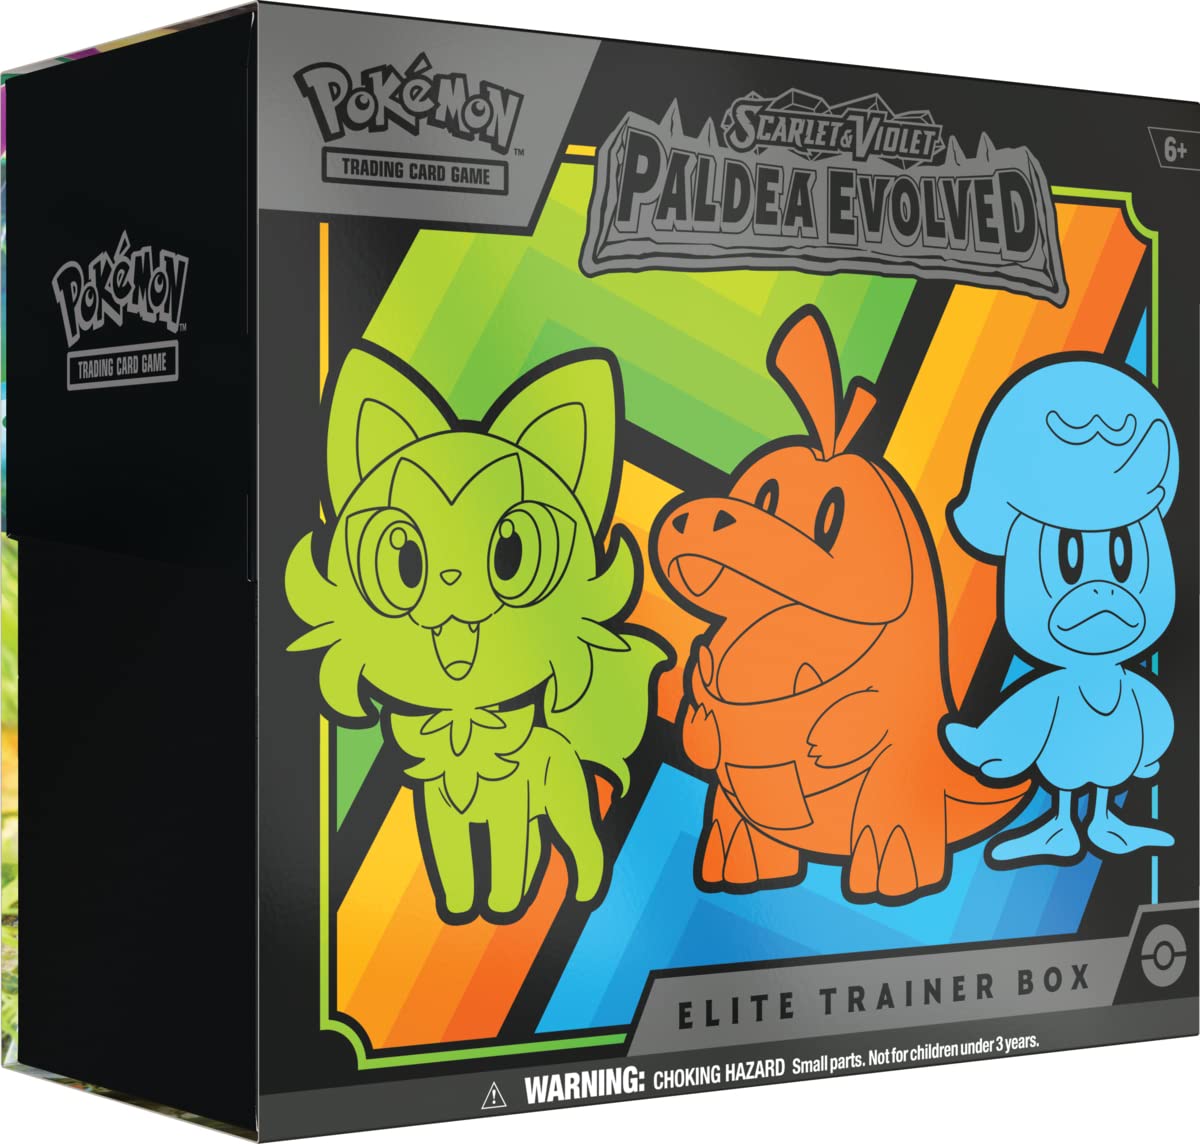 Pokemon Trading Cards: $20 off of $100 Purchase (Sword & Shield: Astral Radiance Elite Trainer Box $36.99, Scarlet & Violet Elite Trainer Box $35.10, & More) + Free Shipping $54.99